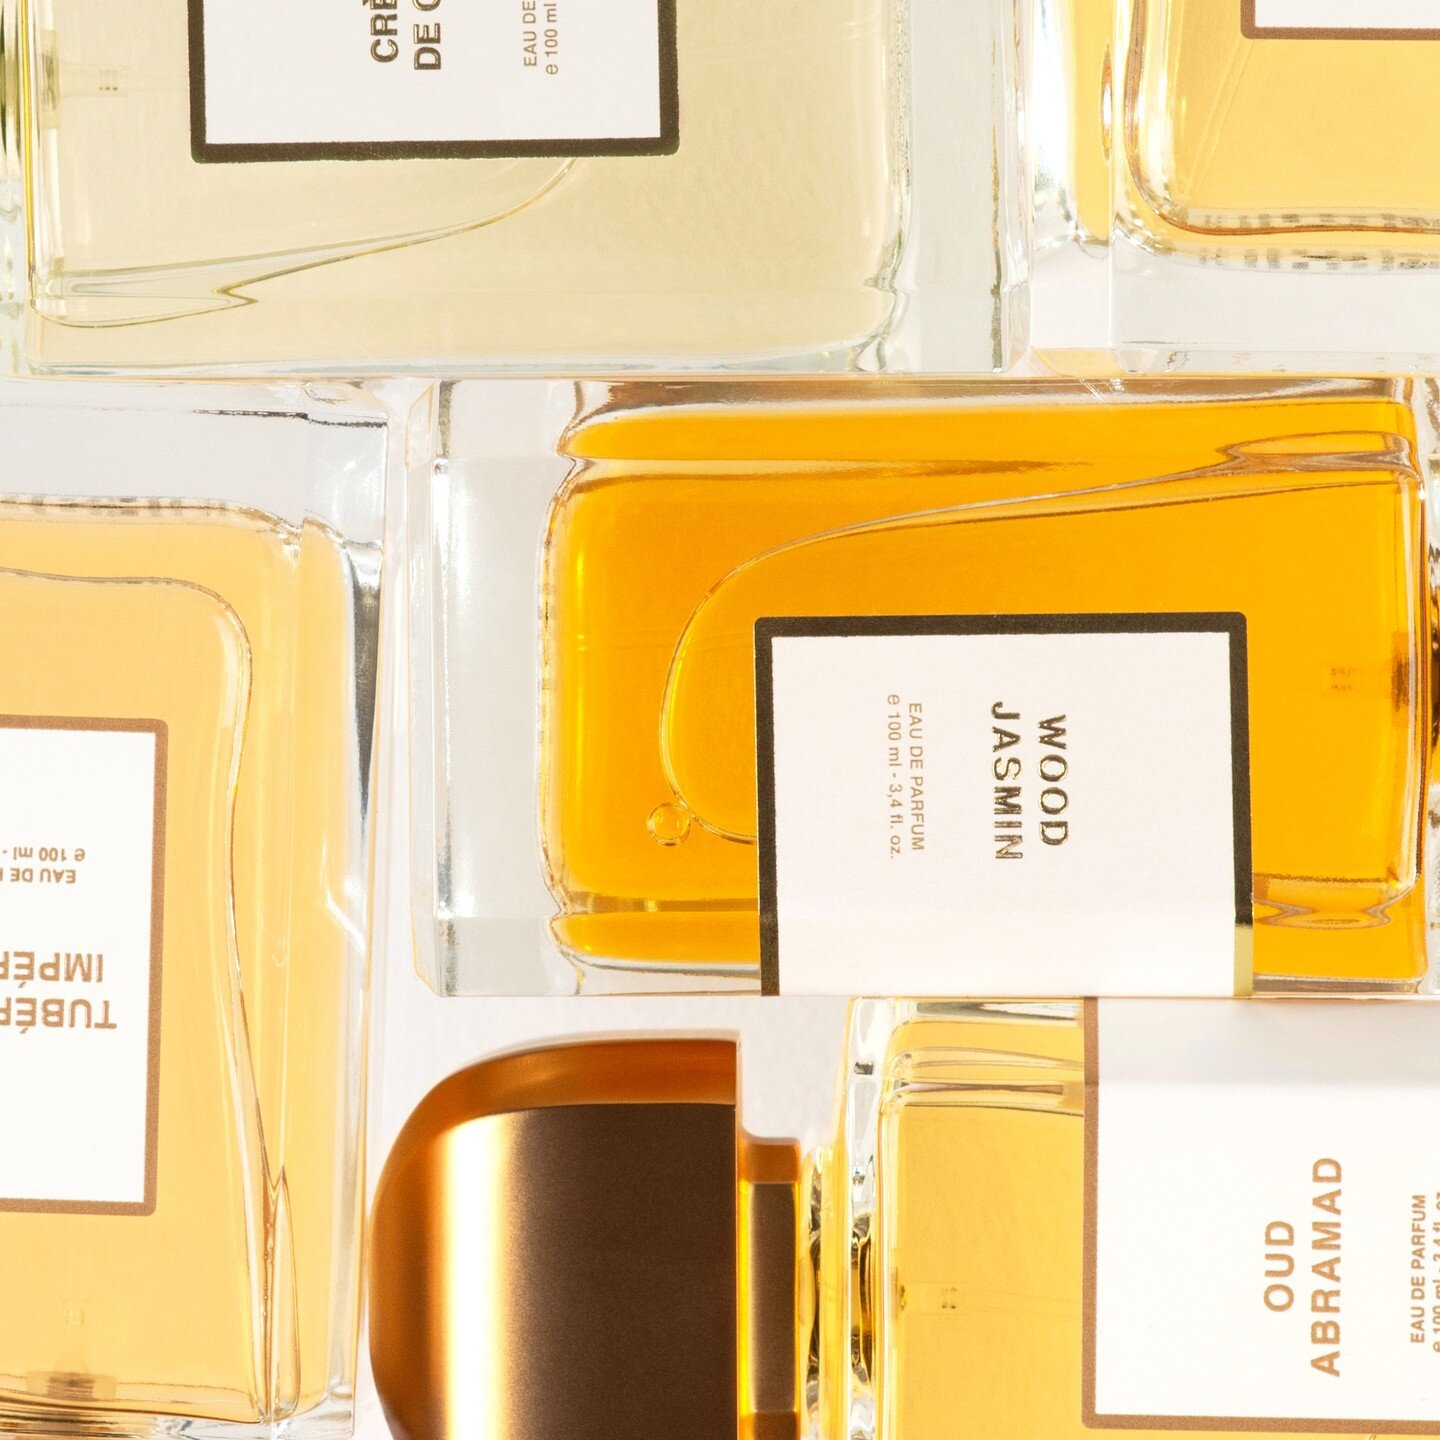 Which fragrance from the @bdkparfumsparis Collection Matieres is your favorite? These fragrances, all highlighting one principal raw material in French perfumery, are inspired by travel, art, and the act of discovery. 

📸: Provided by the brand.
🏷️